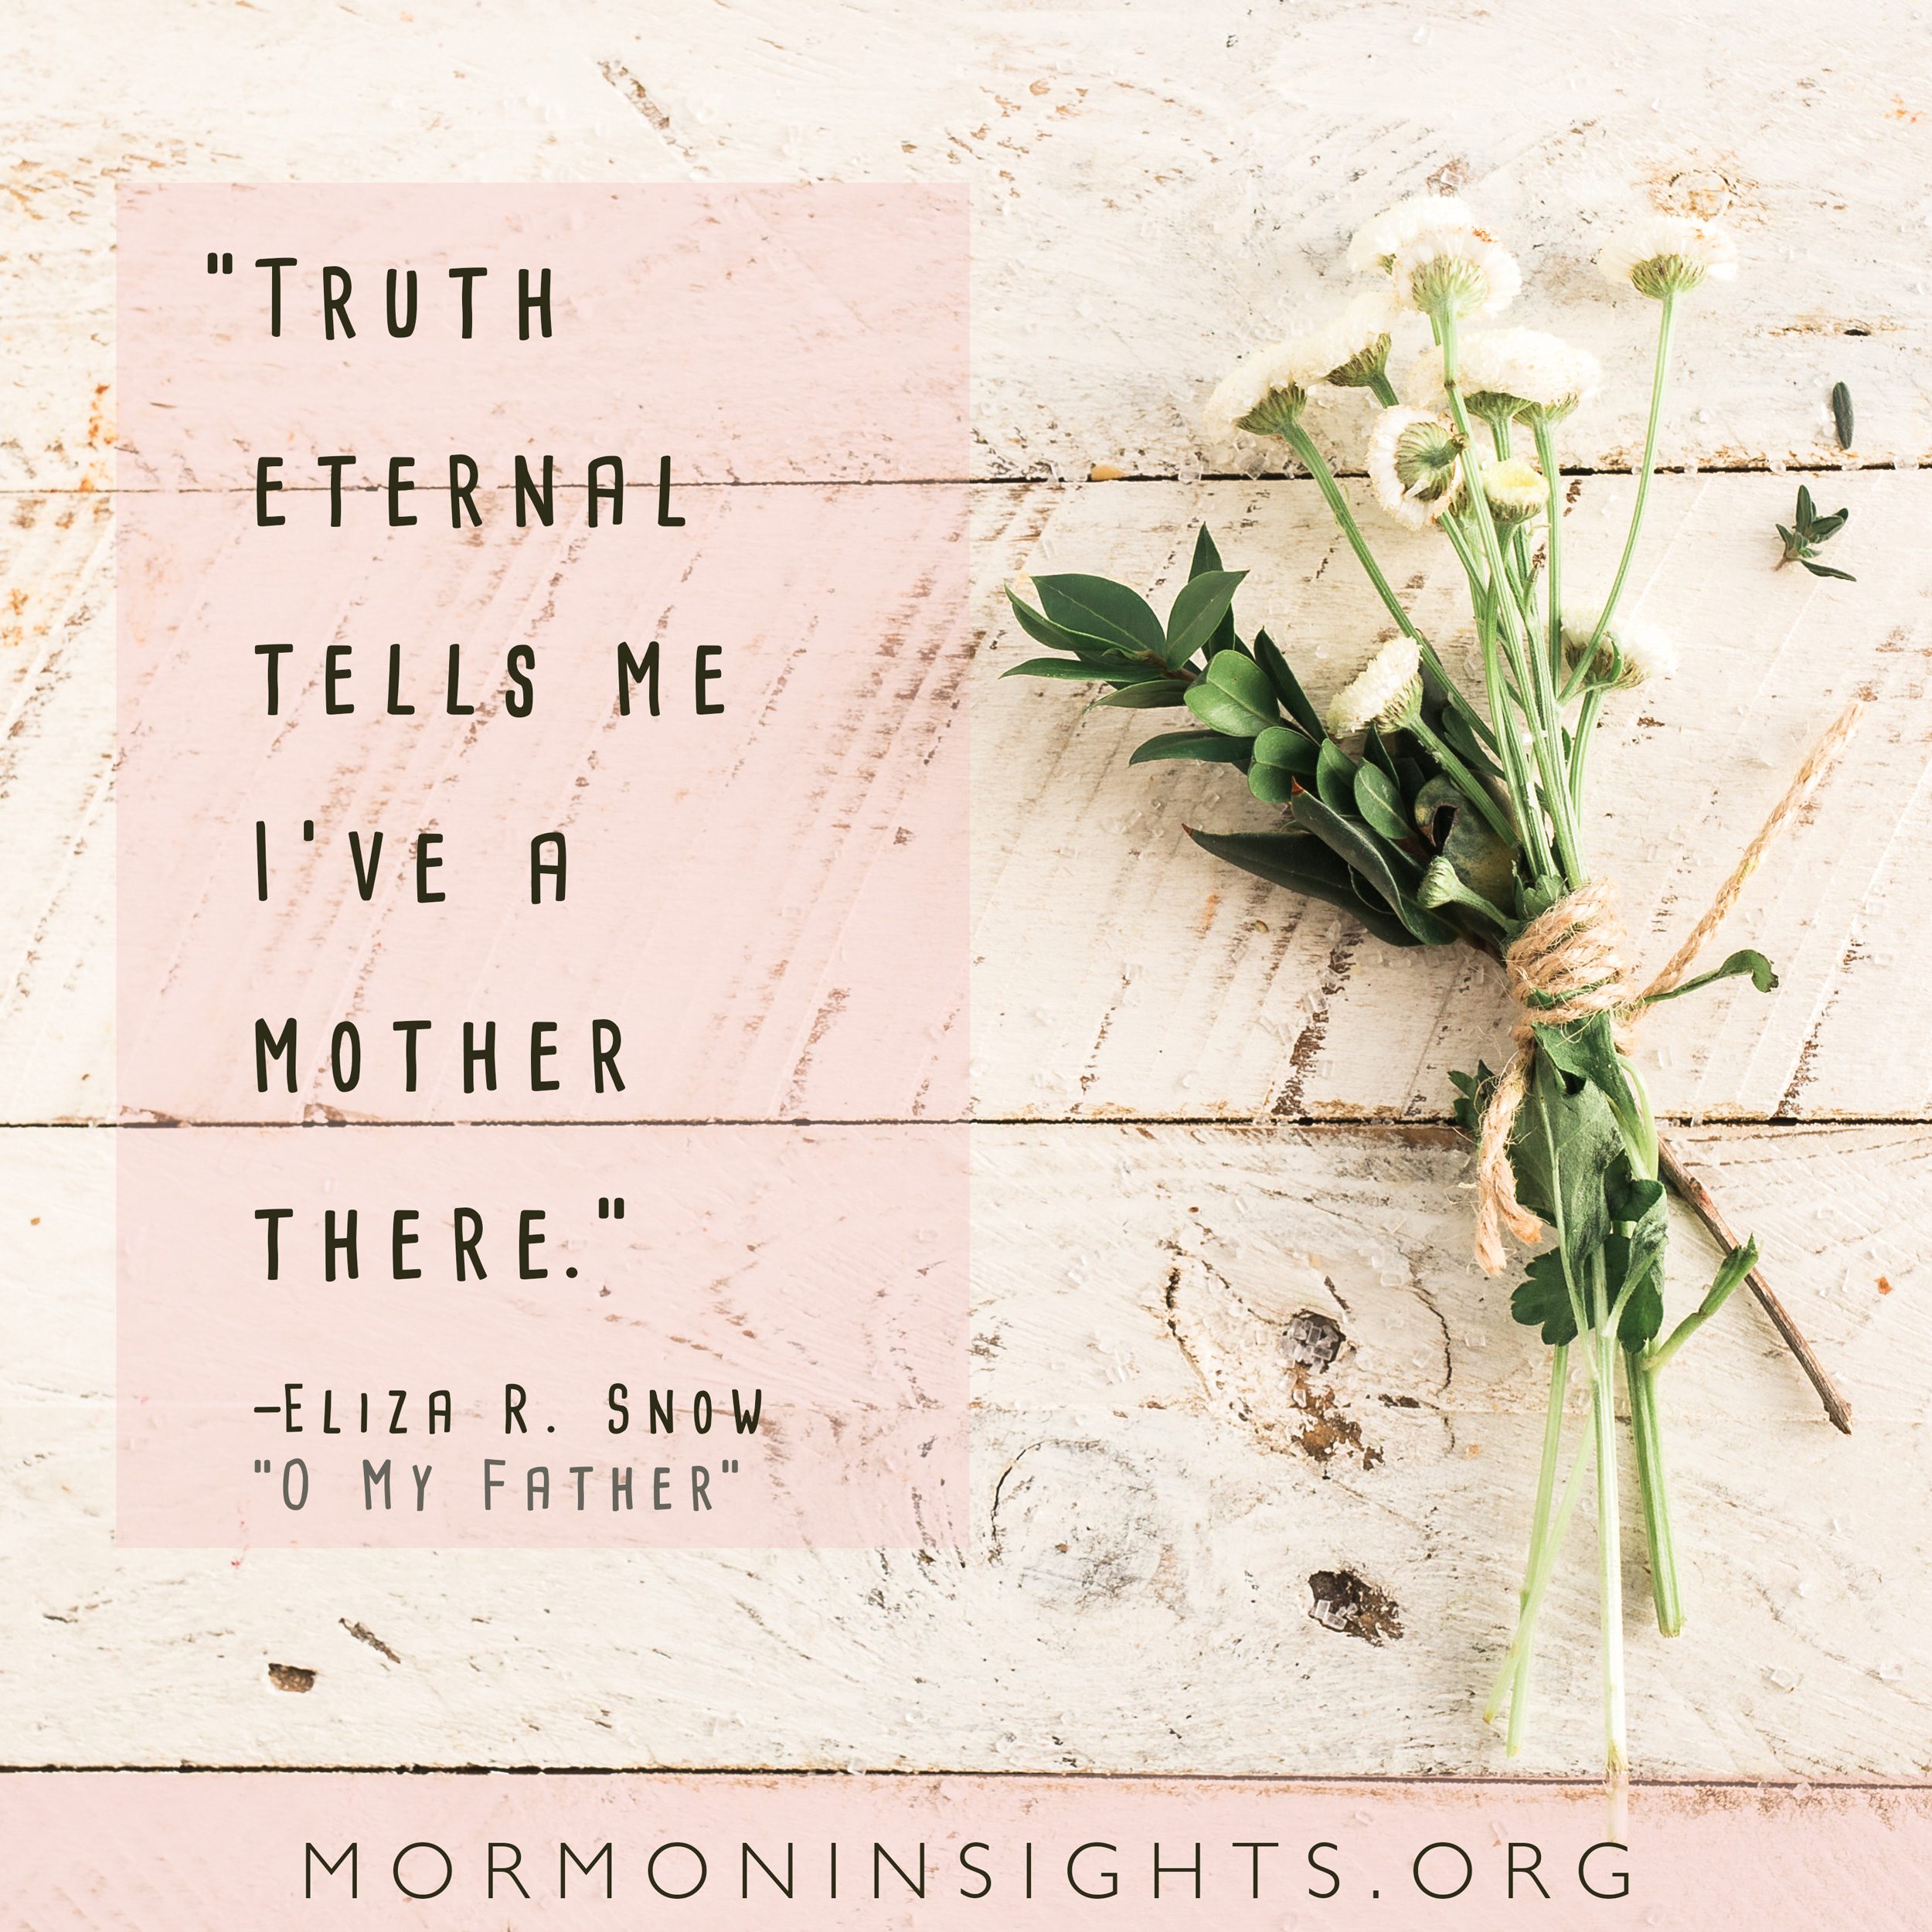 "Truth eternal tells me I've a mother there." -Eliza R. Snow, "O My Father"